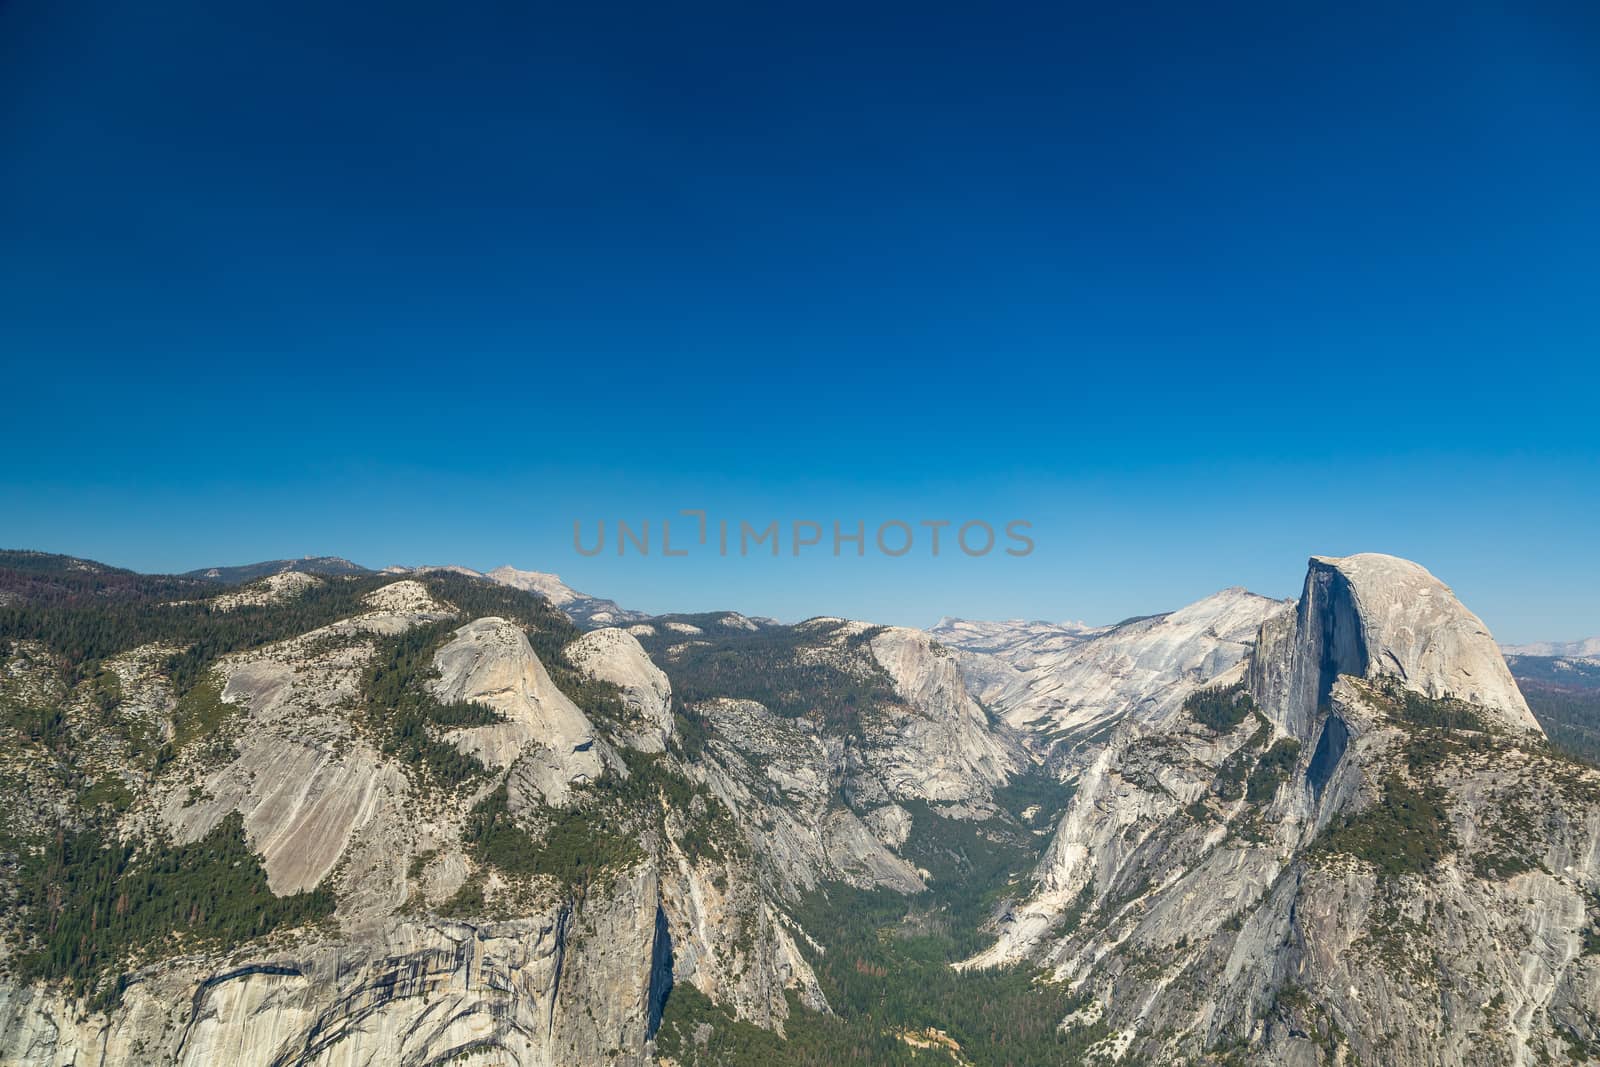 Glacier Point is a viewpoint above Yosemite Valley, in California, United States. It is located on the south wall of Yosemite Valley at an elevation of 7,214 feet